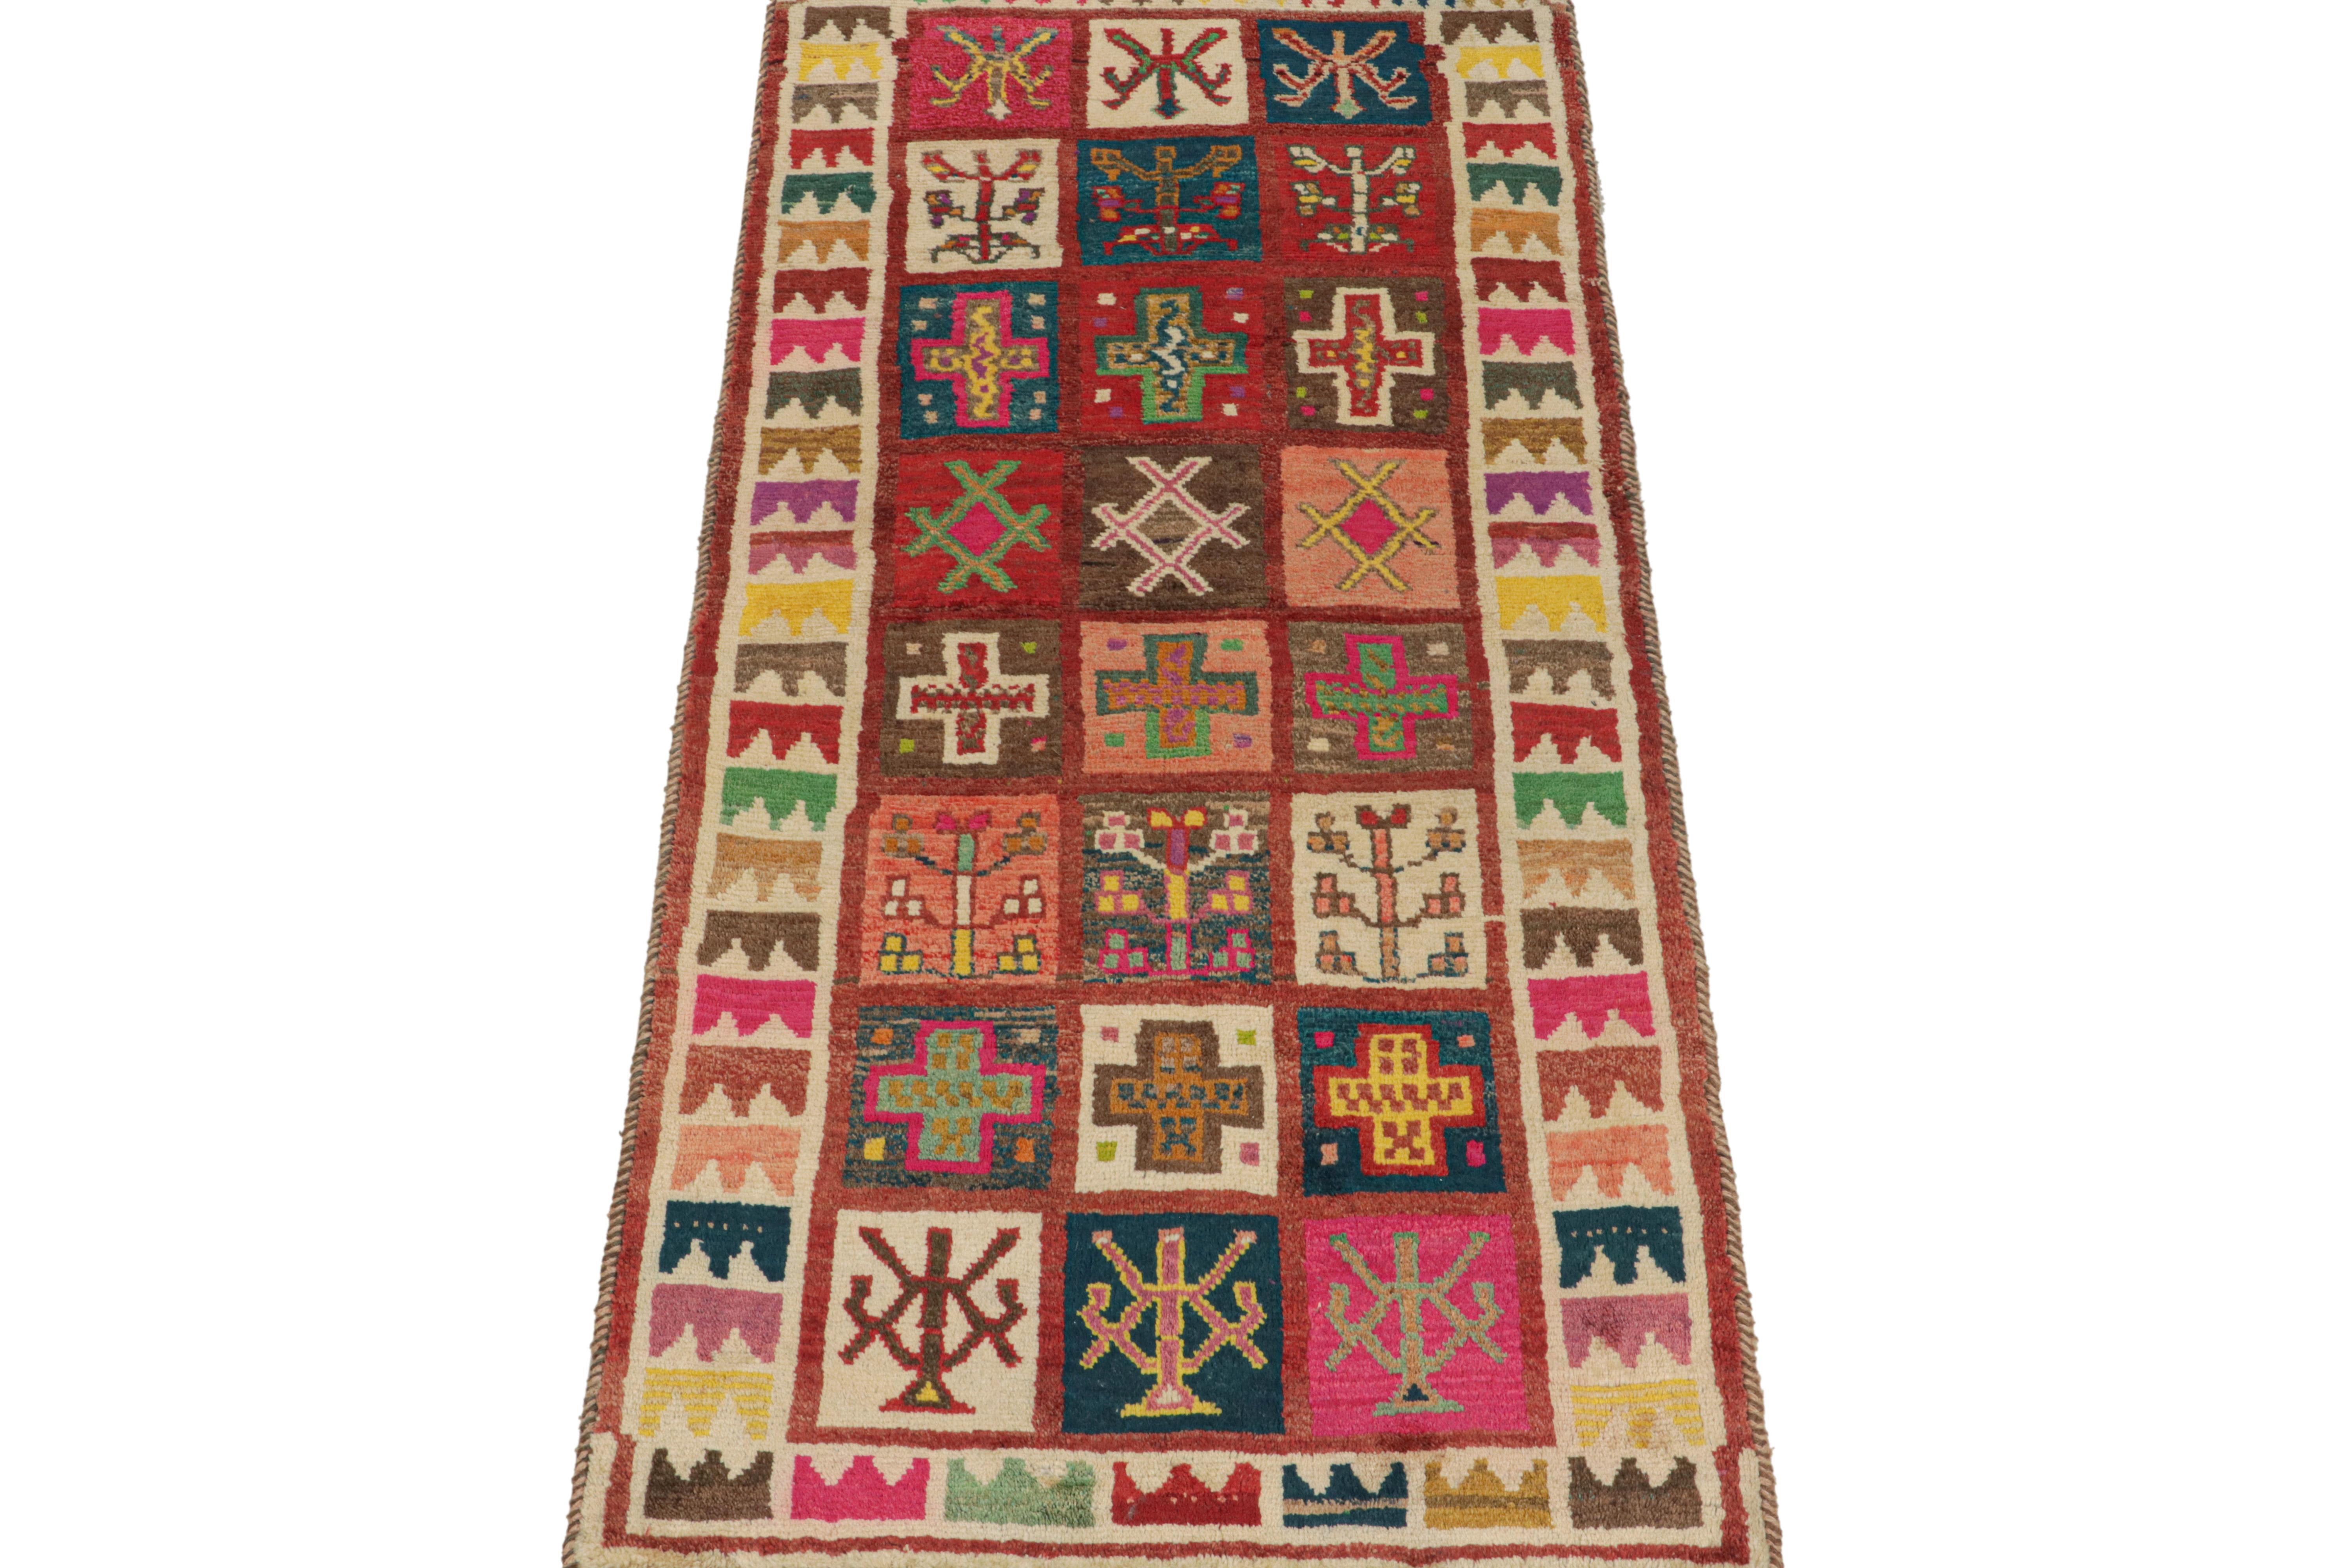 This vintage 3x8 Persian runner is a Gabbeh rug that originates from the Qashqai tribe—hand-knotted in wool circa 1950-1960.

Its design hosts a variety of primitivist geometric patterns—its field motifs within squares while its border patterns